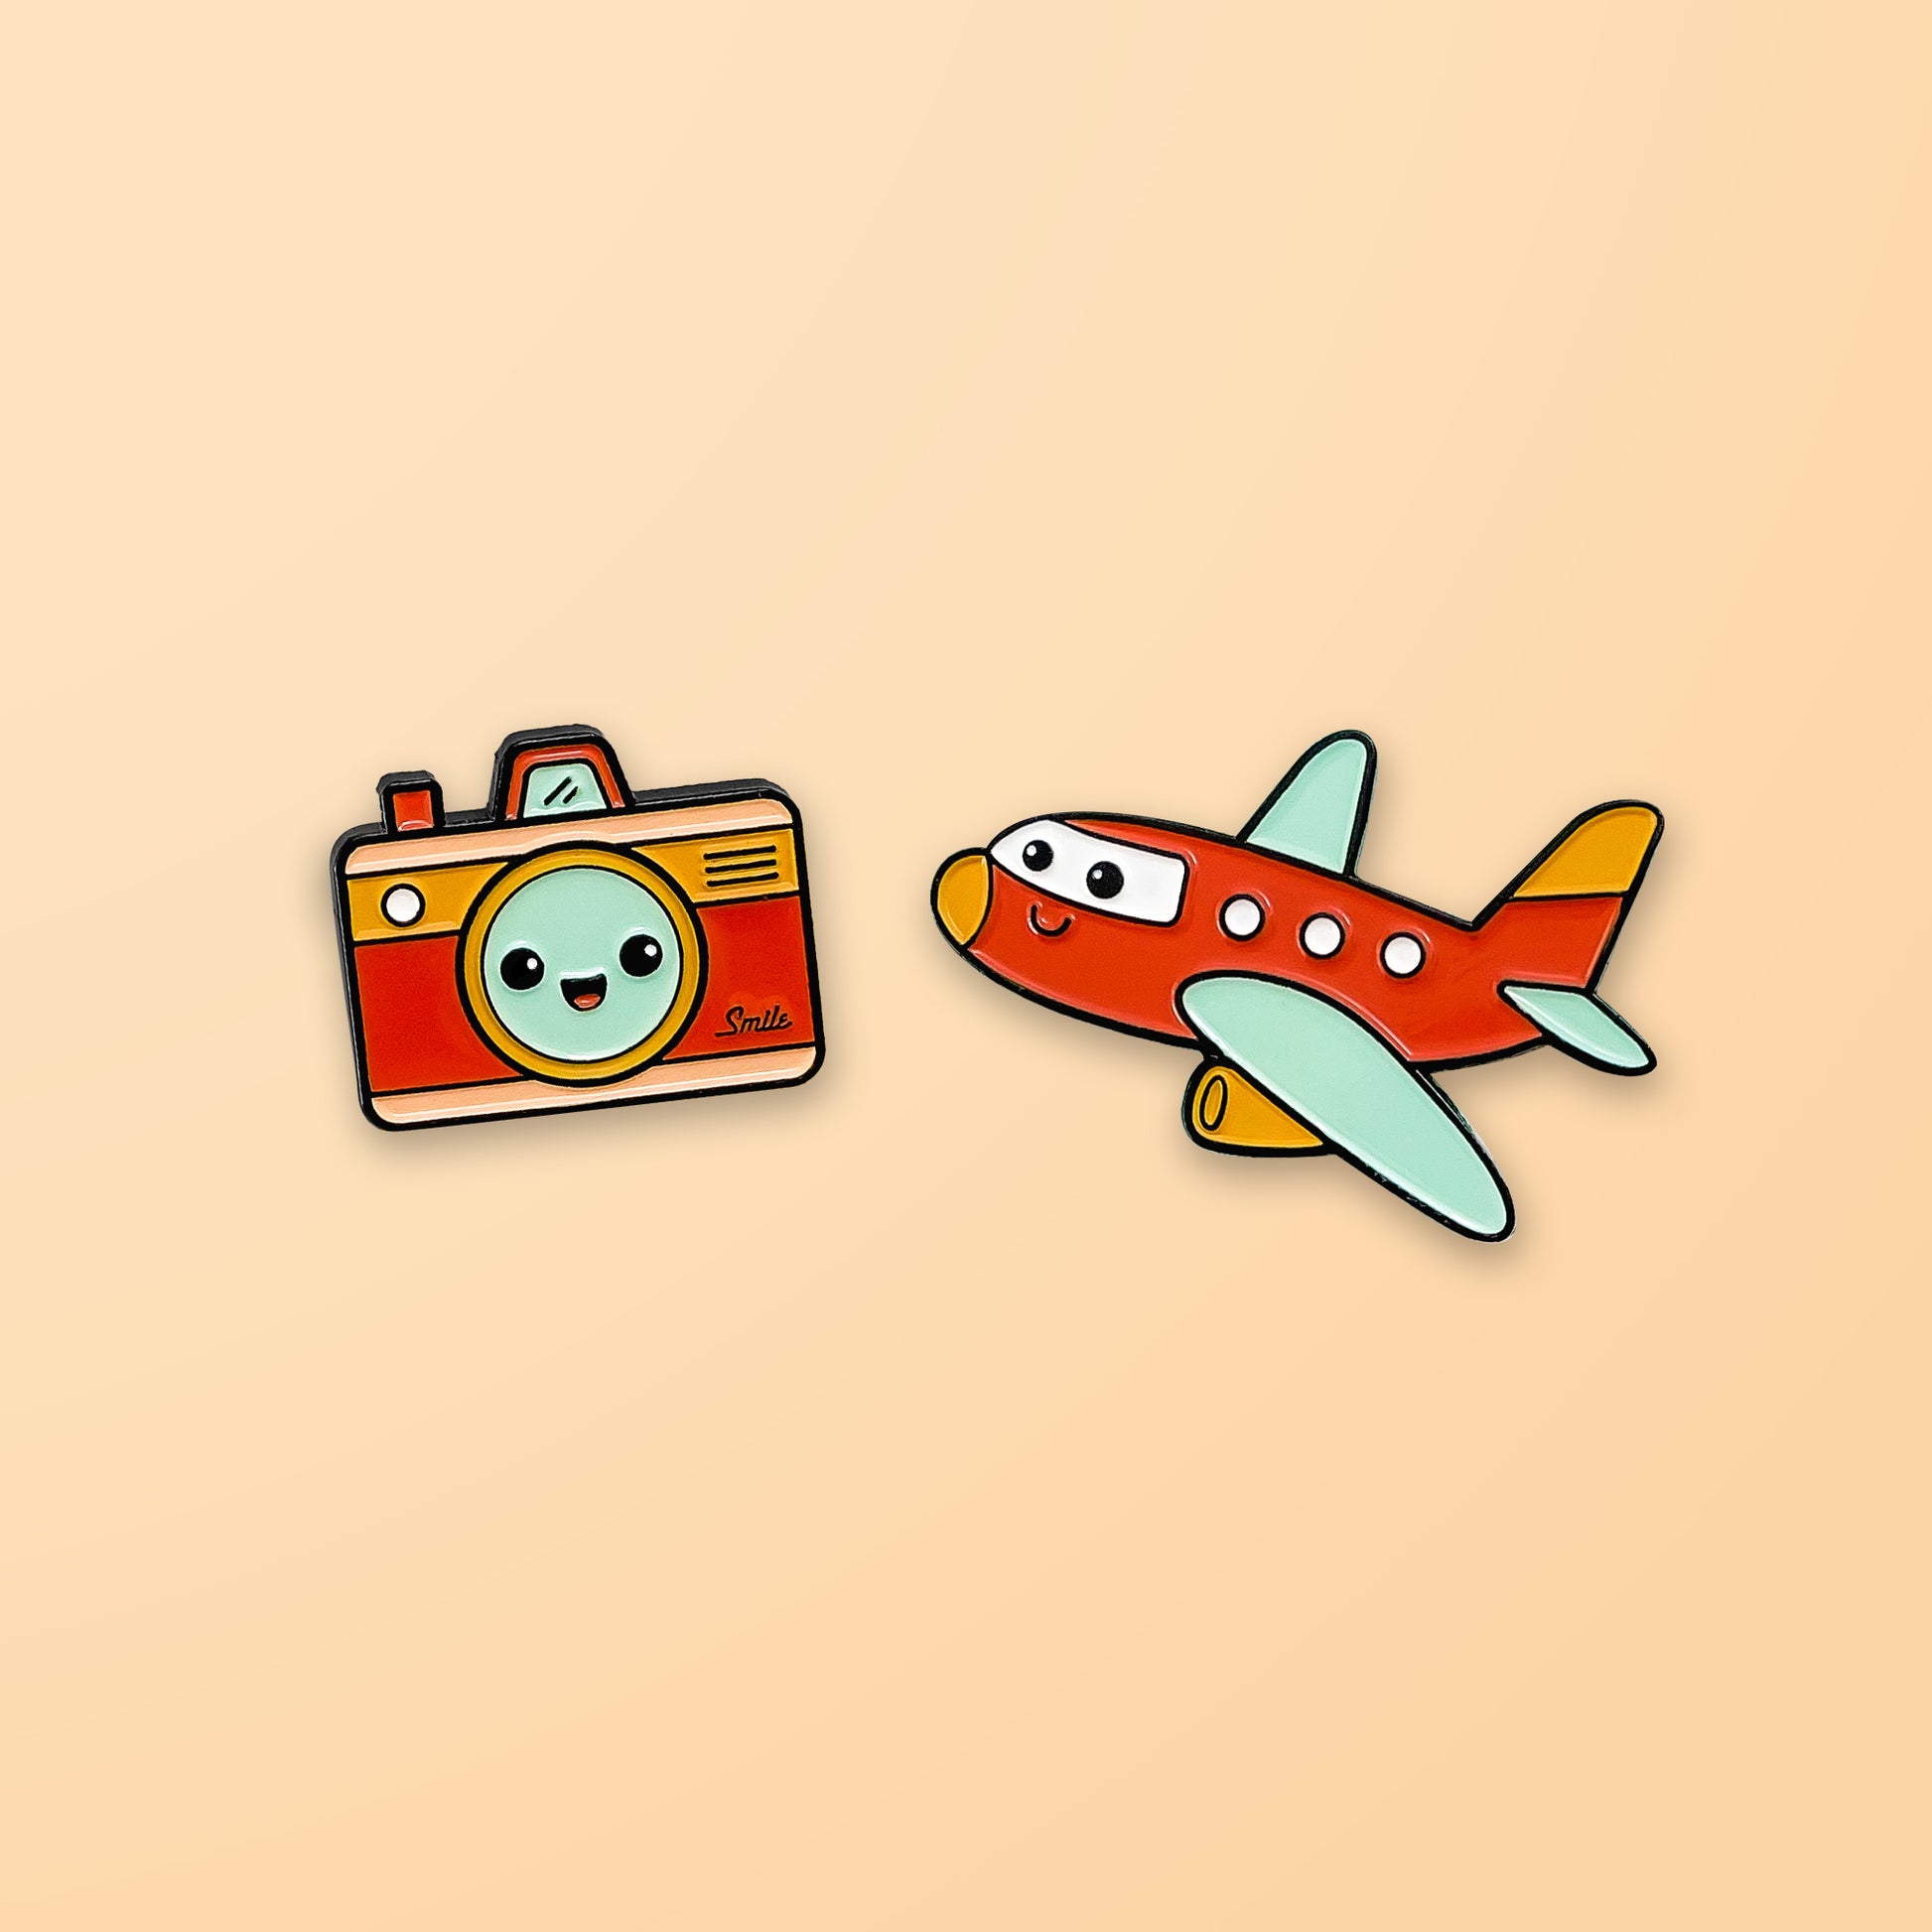 Camera and Plane enamel pins on peach background